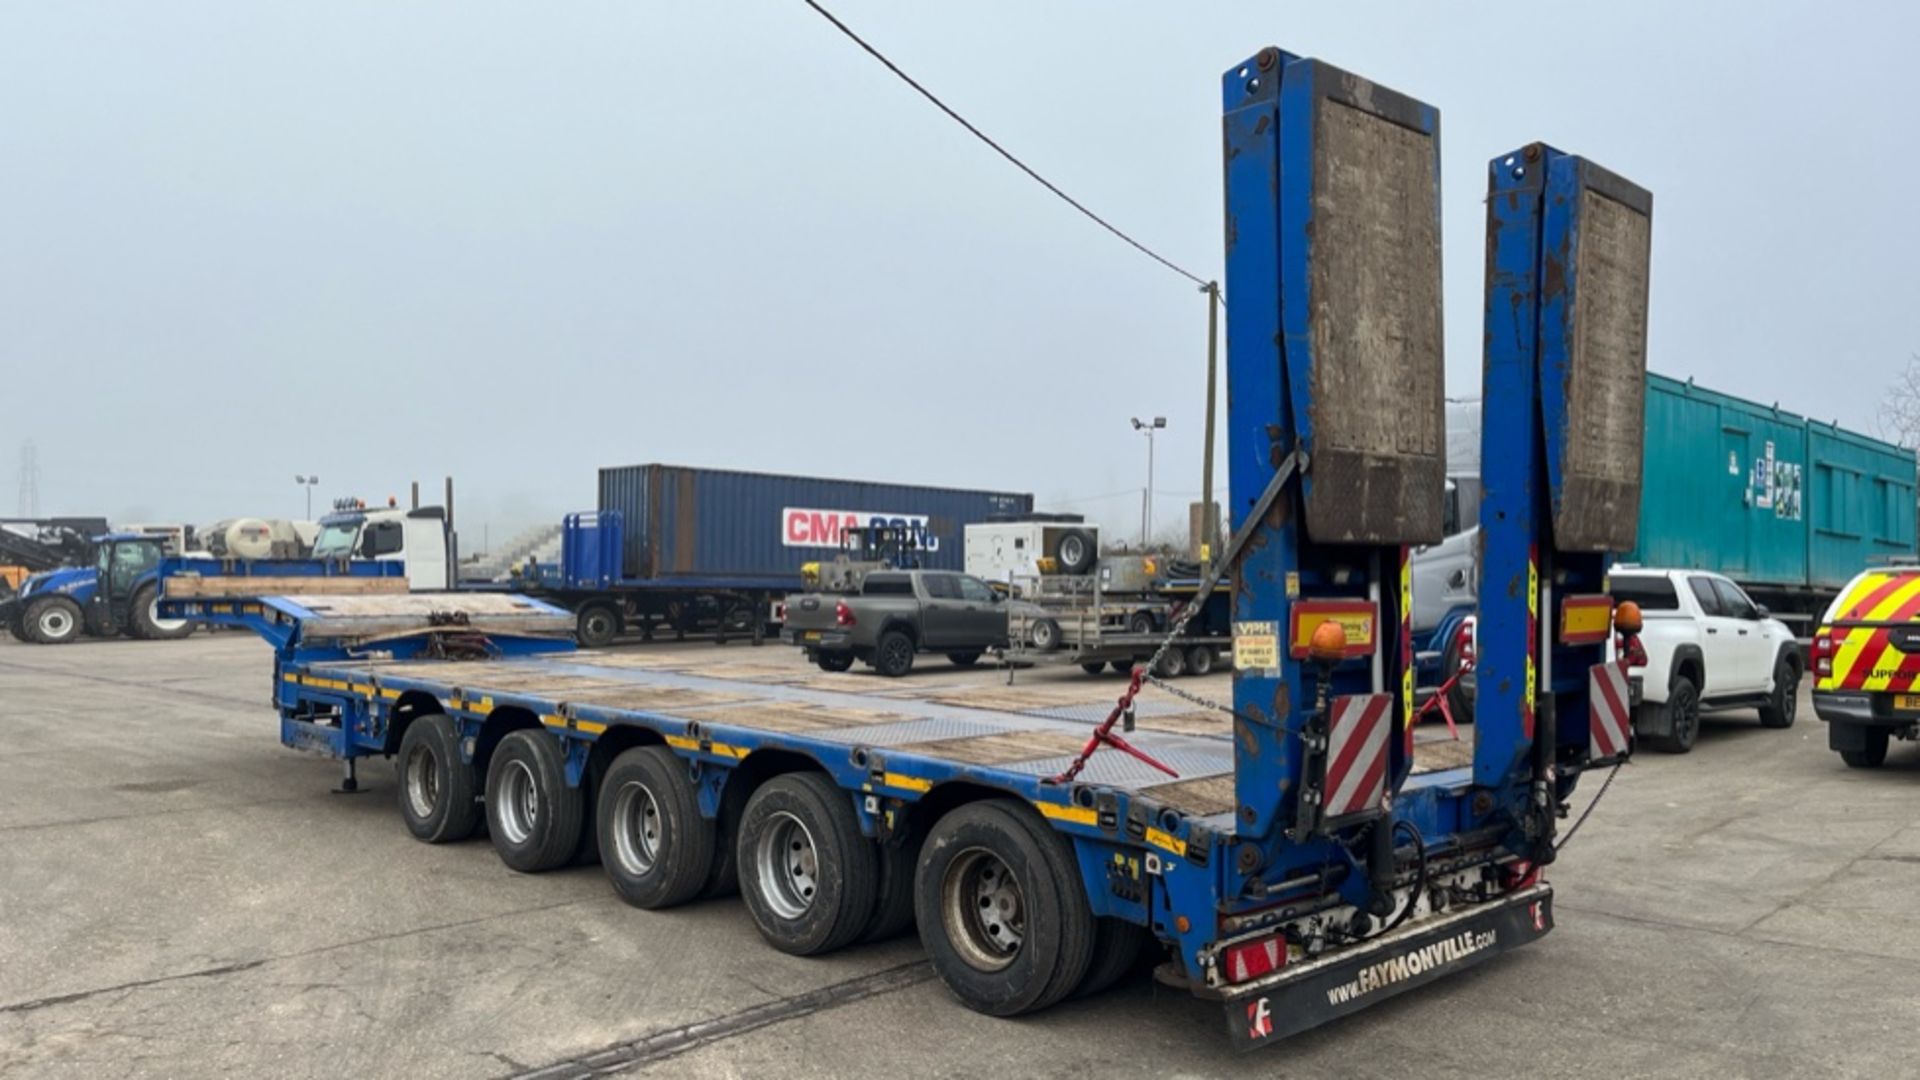 FAYMONVILLE MULTIMAX - EXTENDABLE SEMI LOW LOADER Trailer (Year 2019) - Image 4 of 34